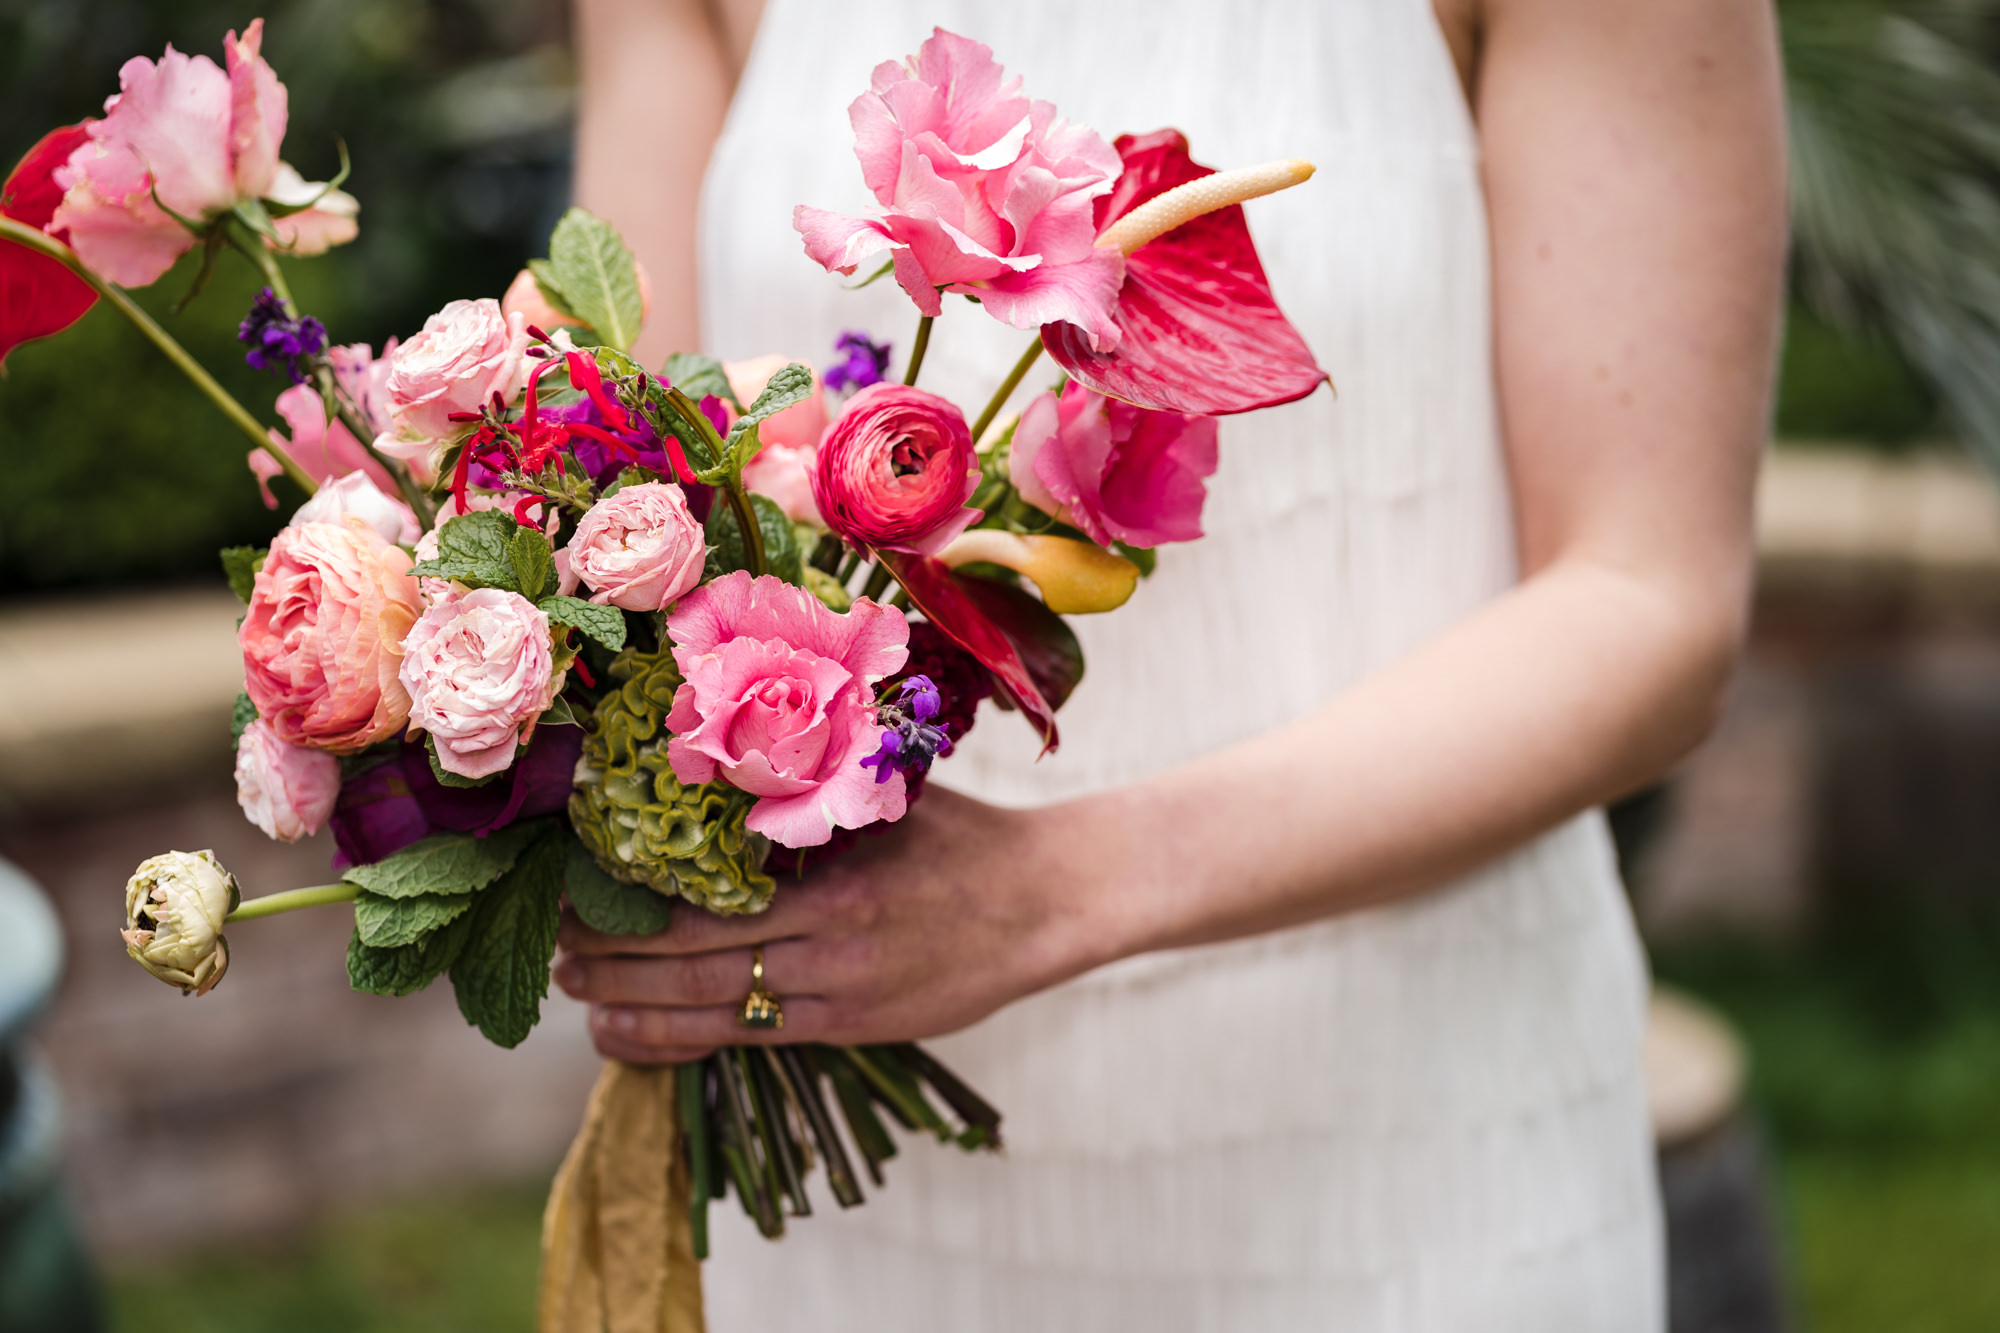 bride wears short white wedding dress and holds a pink and red bold colourful wedding bouquet